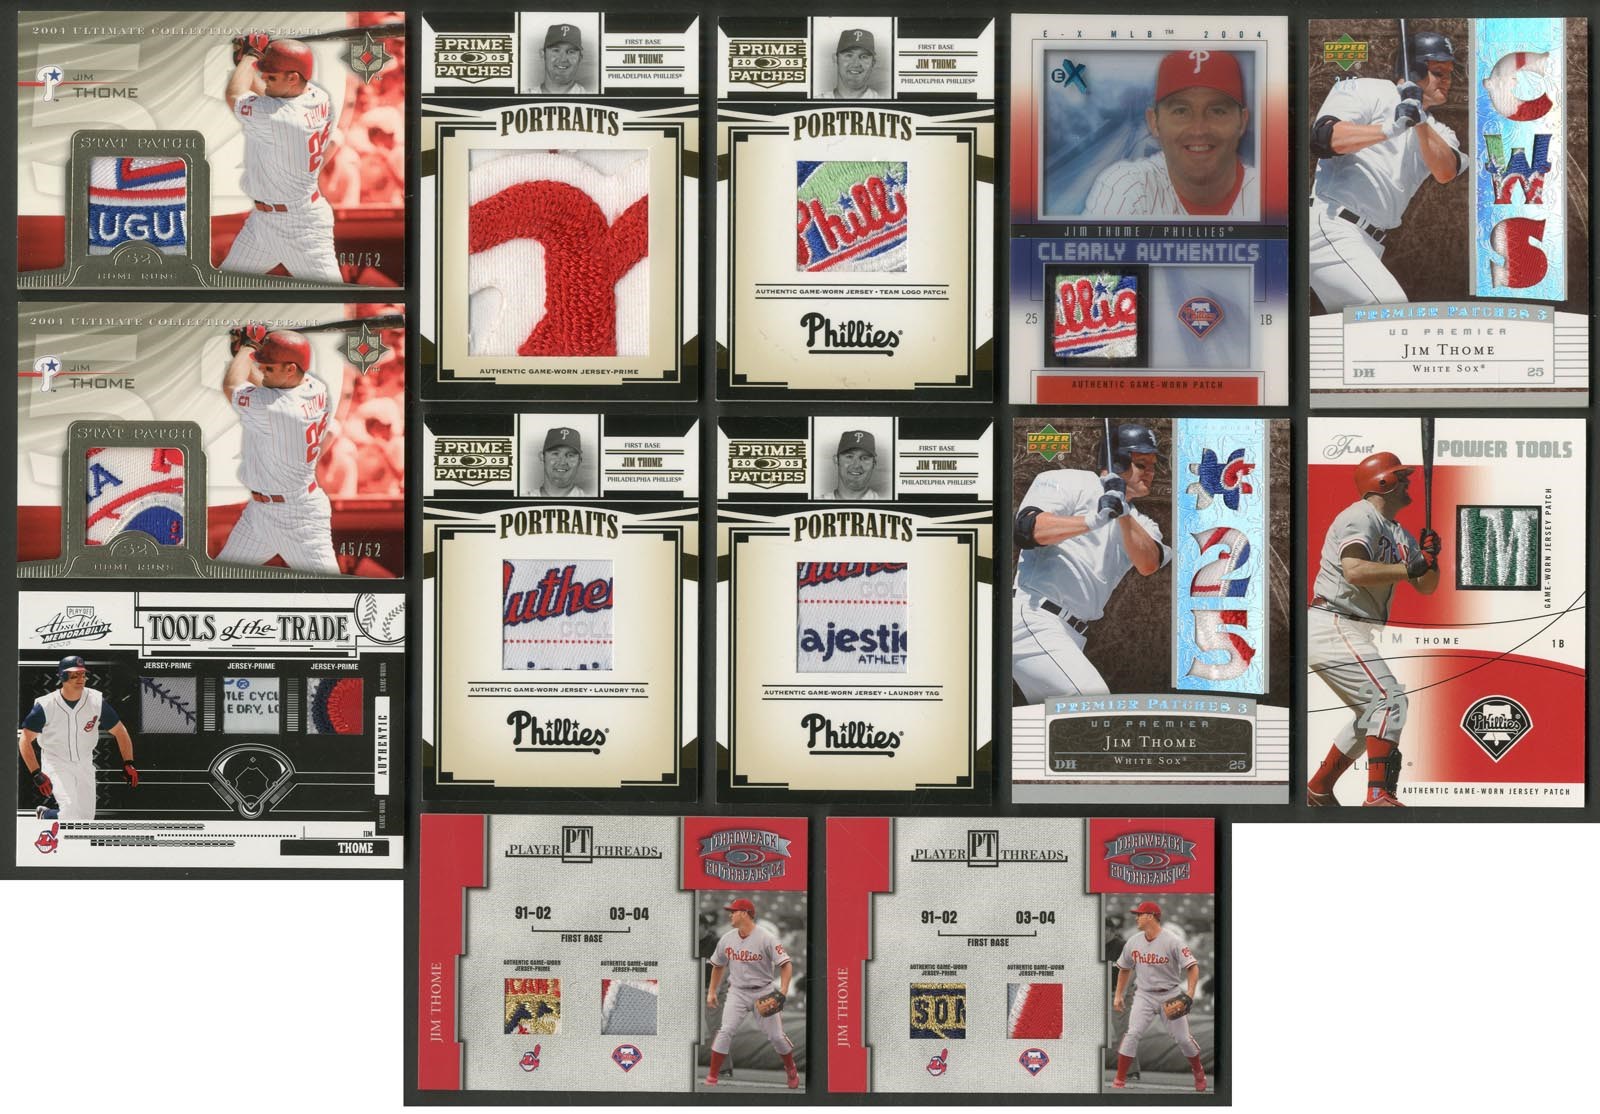 Huge Jim Thome Modern Insert Game Worn Multi-Color Patch Collection (540+)